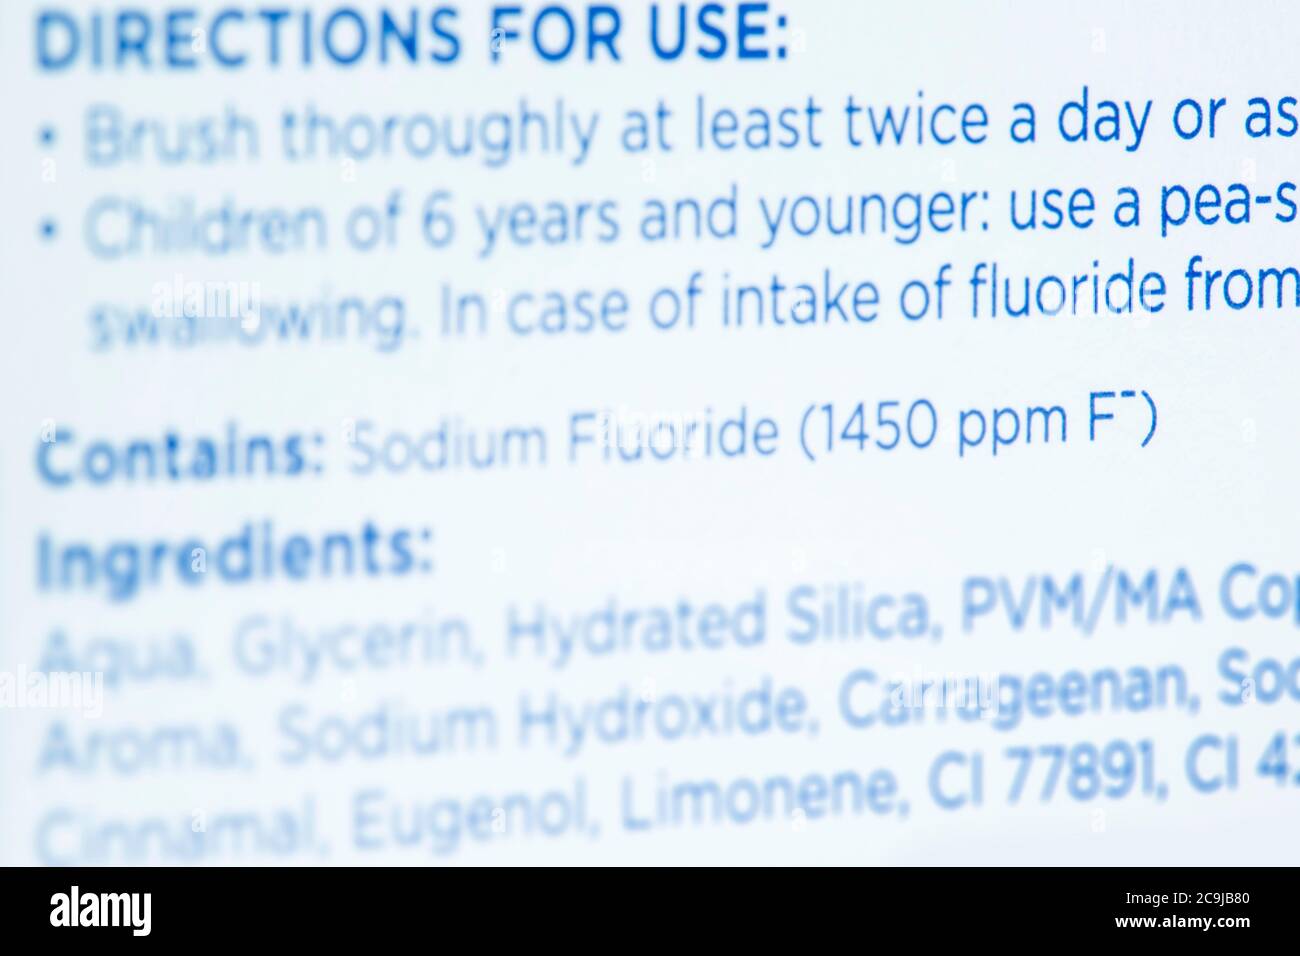 Children's toothpaste ingredients and directions for use. Stock Photo